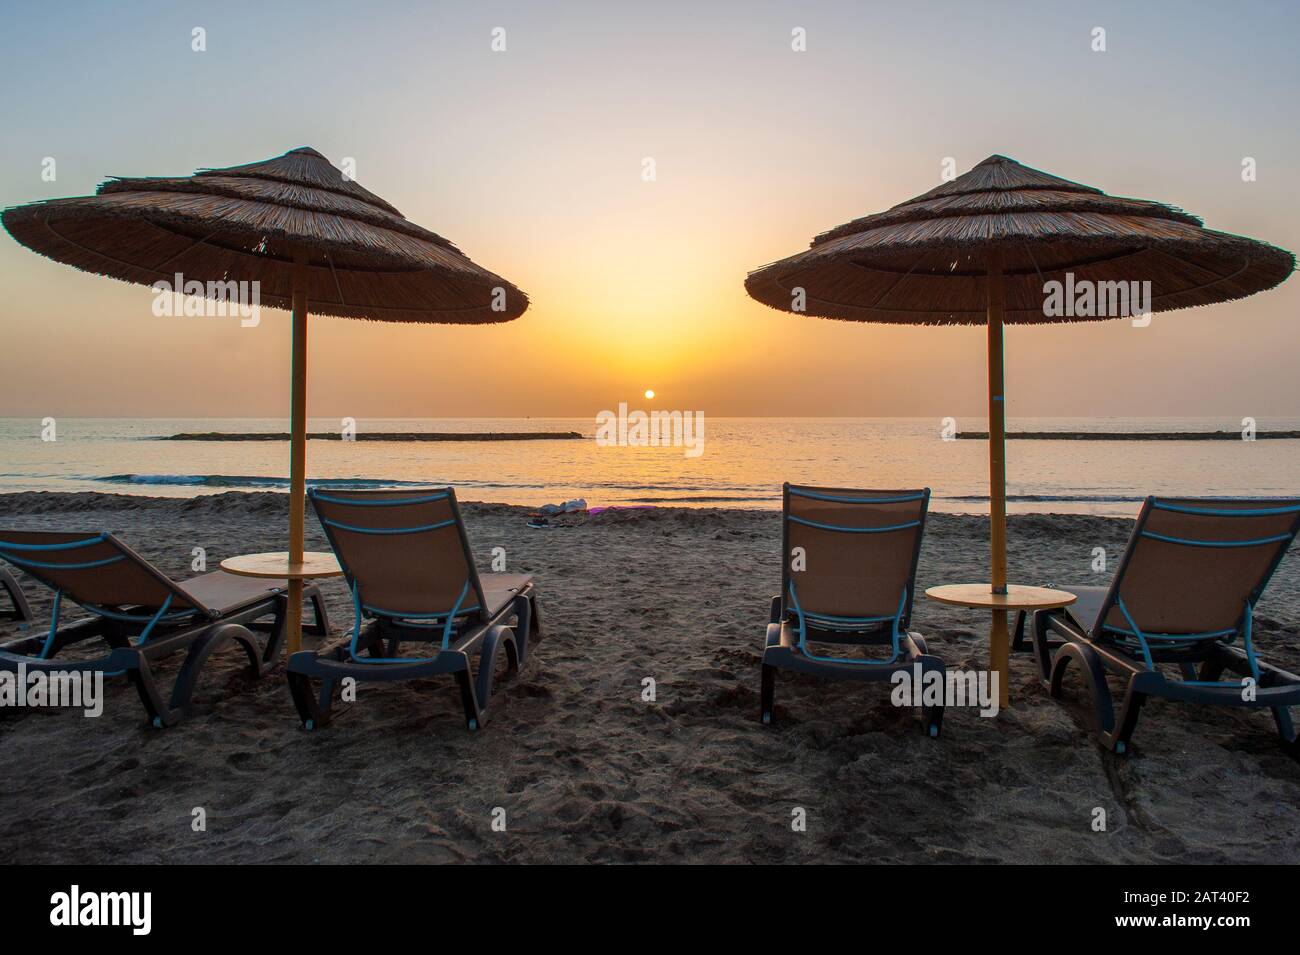 Two loungers on an empty beach just before sunset. Stock Photo